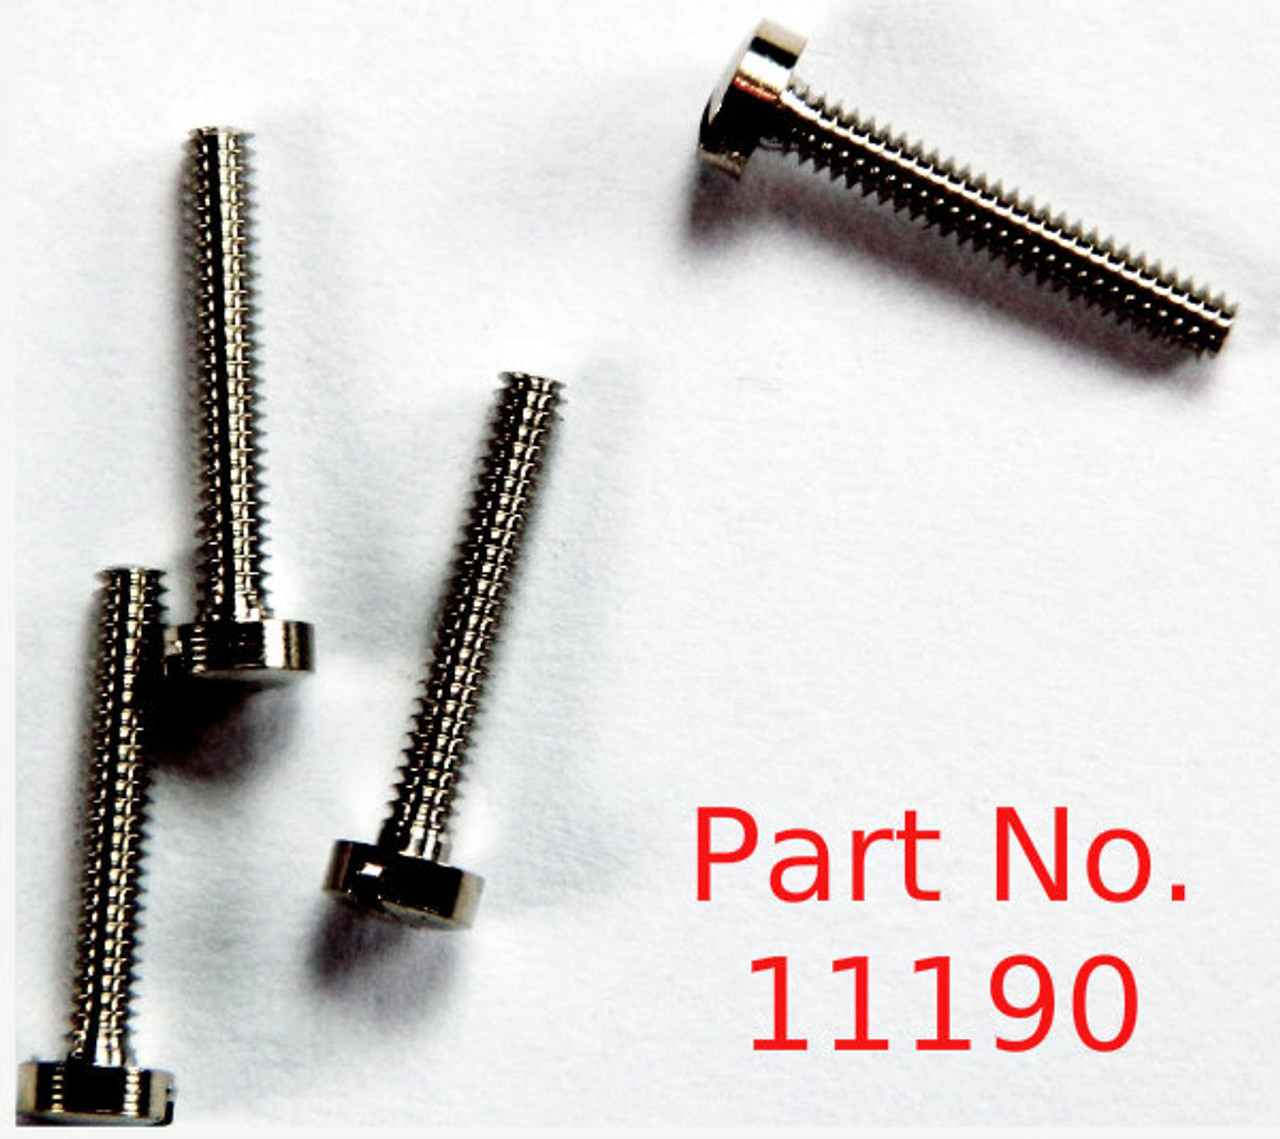 Machine Screw
Oversized Thread 00-90 (0.050”)
Head Diameter 2.5mm / 0.098"
Overall Length (OAL) is 8.8mm / 0.346"
Material: Nickel Silver, a premium copper alloy resistant to tarnish and often used in jewelry and eye wear.
Part Color Finish is Silver
Matching/Mating Hex Nut #11120.
Please note this has an over-sized thread major of .050" vs the standard thread major of .046"
Price is for 100 count package 